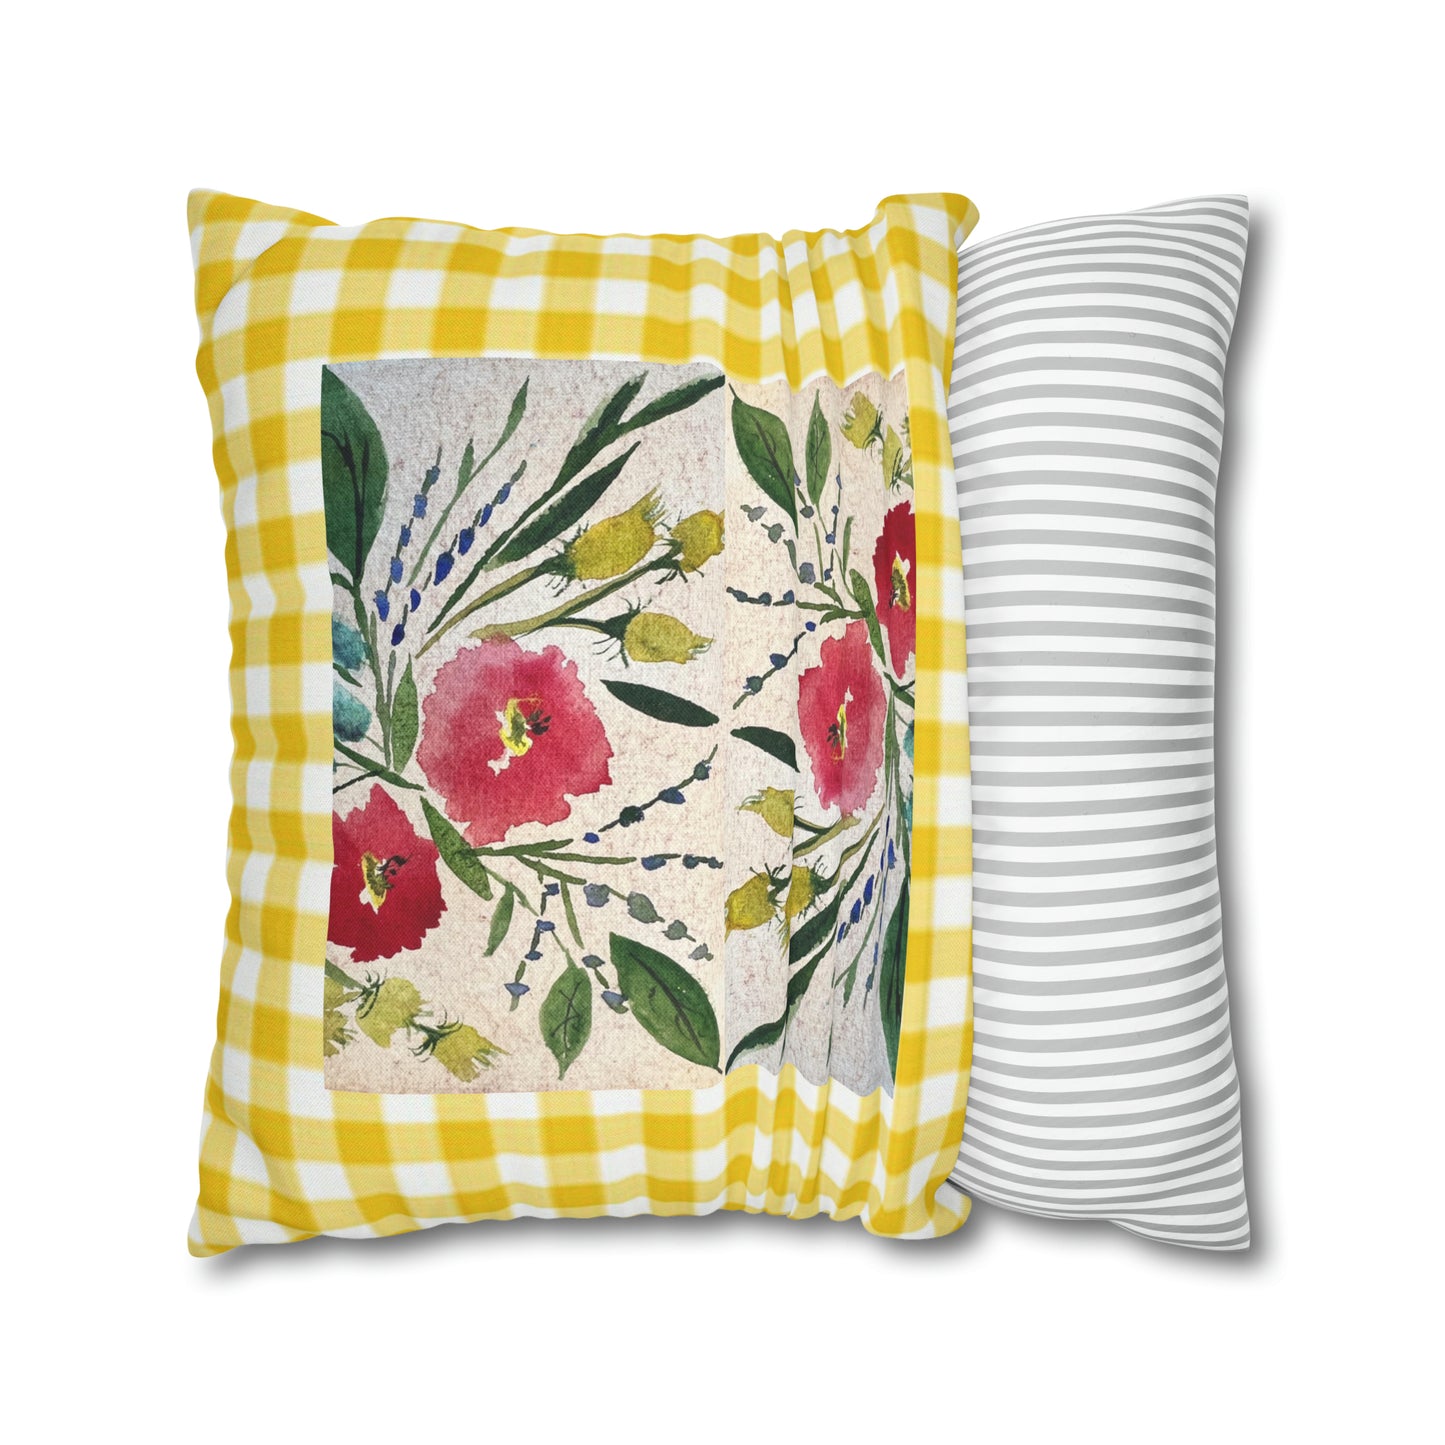 The Cottage Pillow Cover